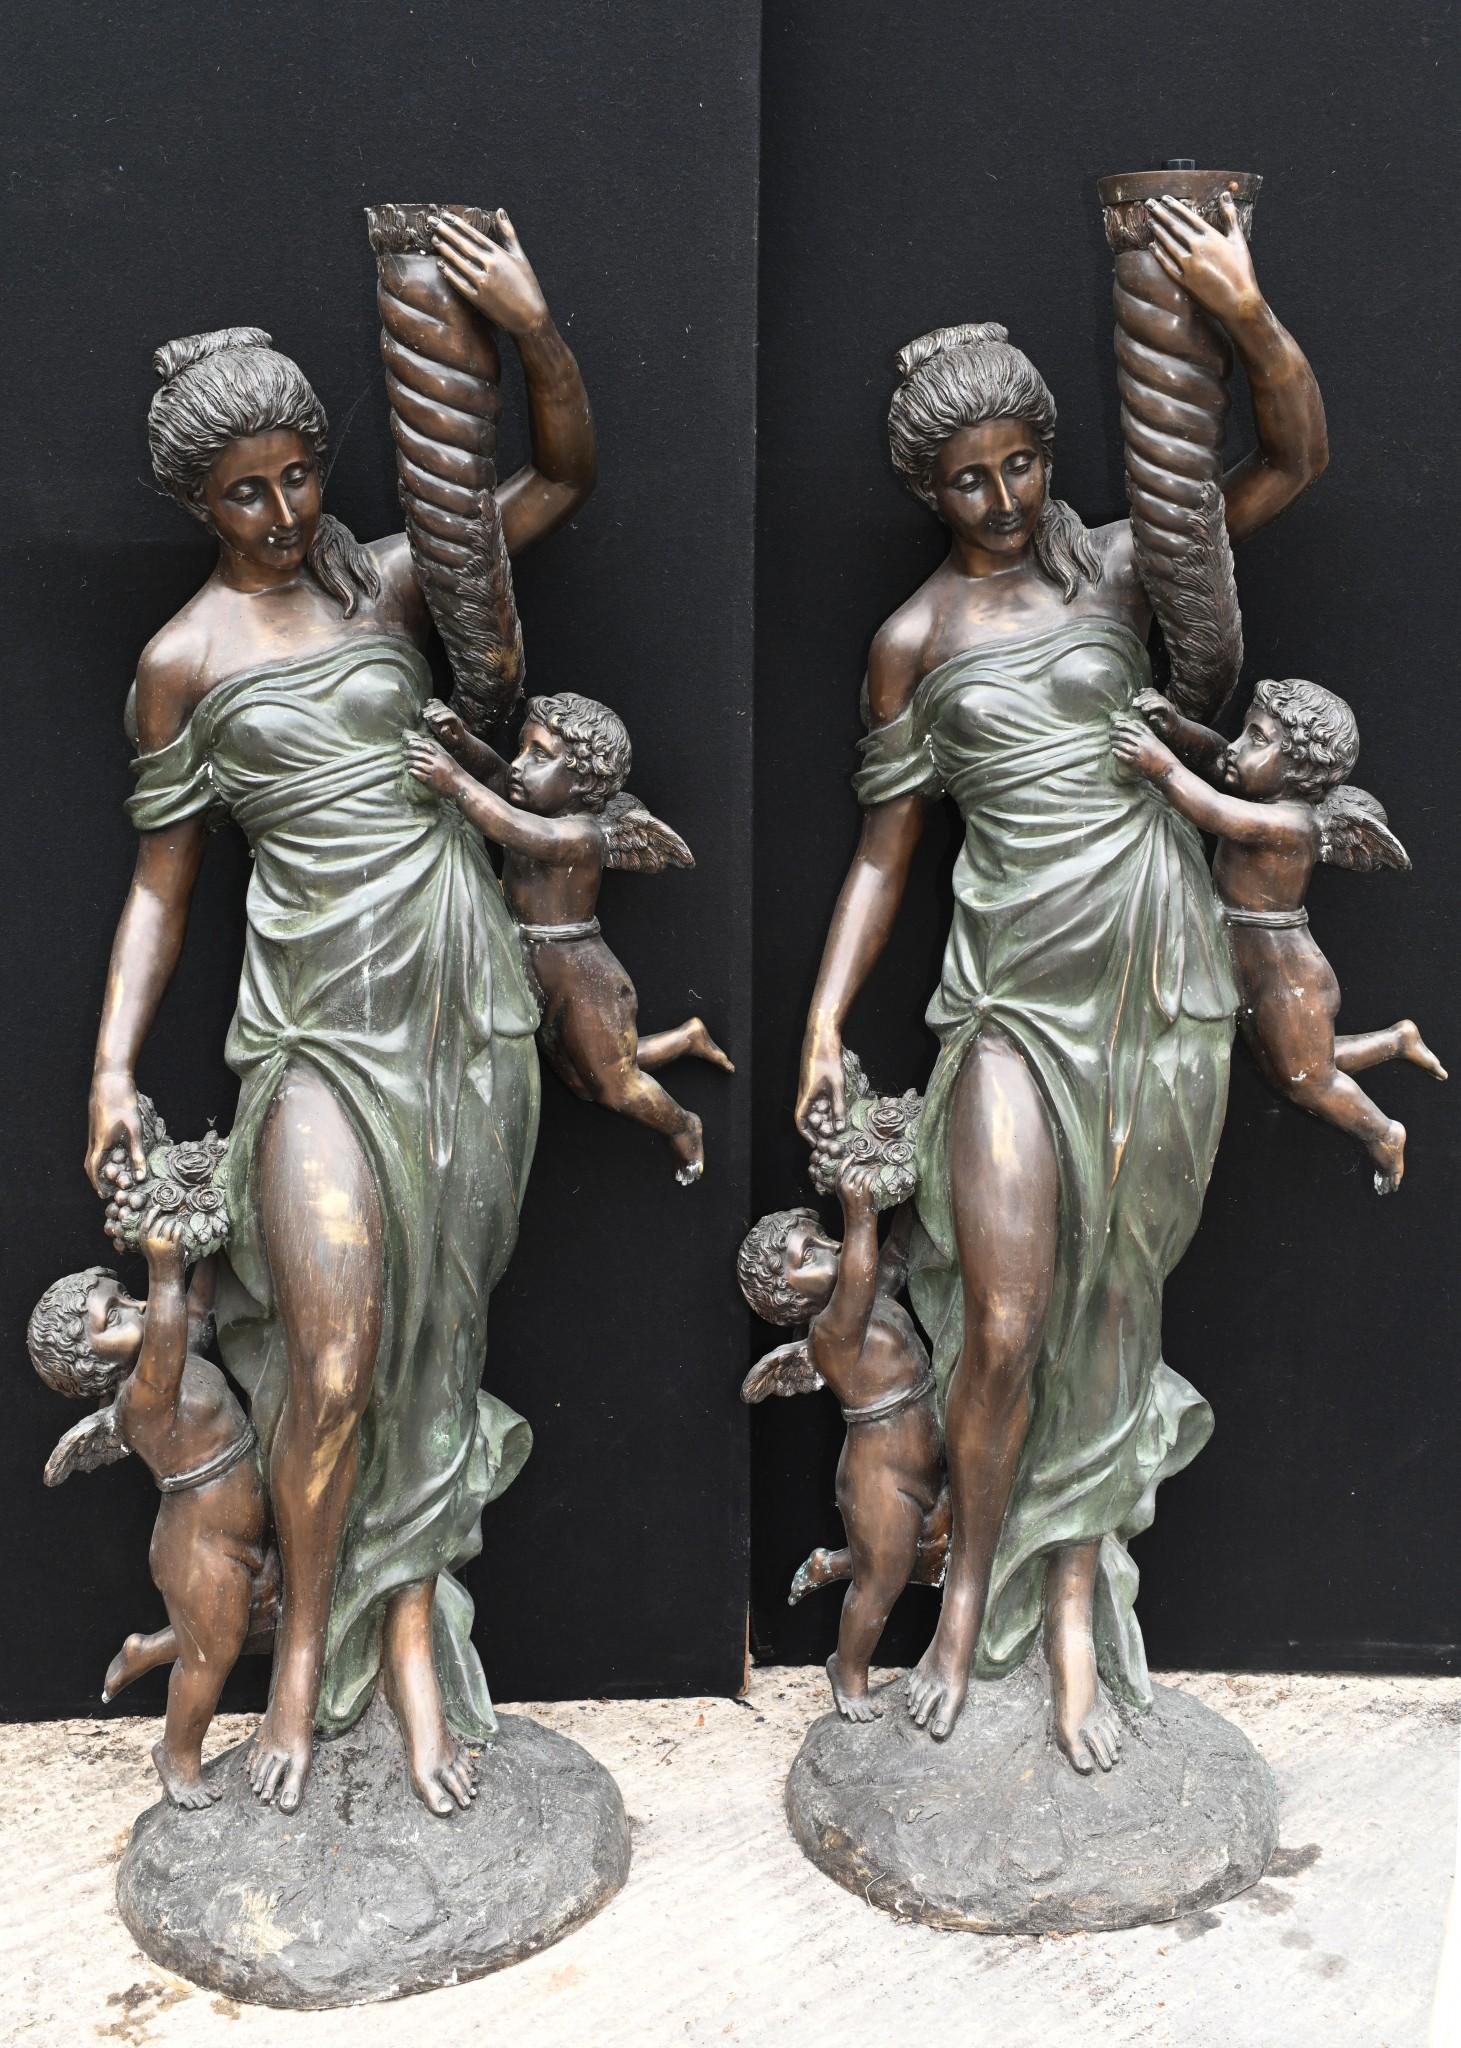 Gorgeous pair of large Italian bronze maidens adorned with cherubs
Each figurine holds the horn of plenty which suggests this might be a representation of Demeter the Goddess of the harvest 
Great casting and a good size at over five feet tall -